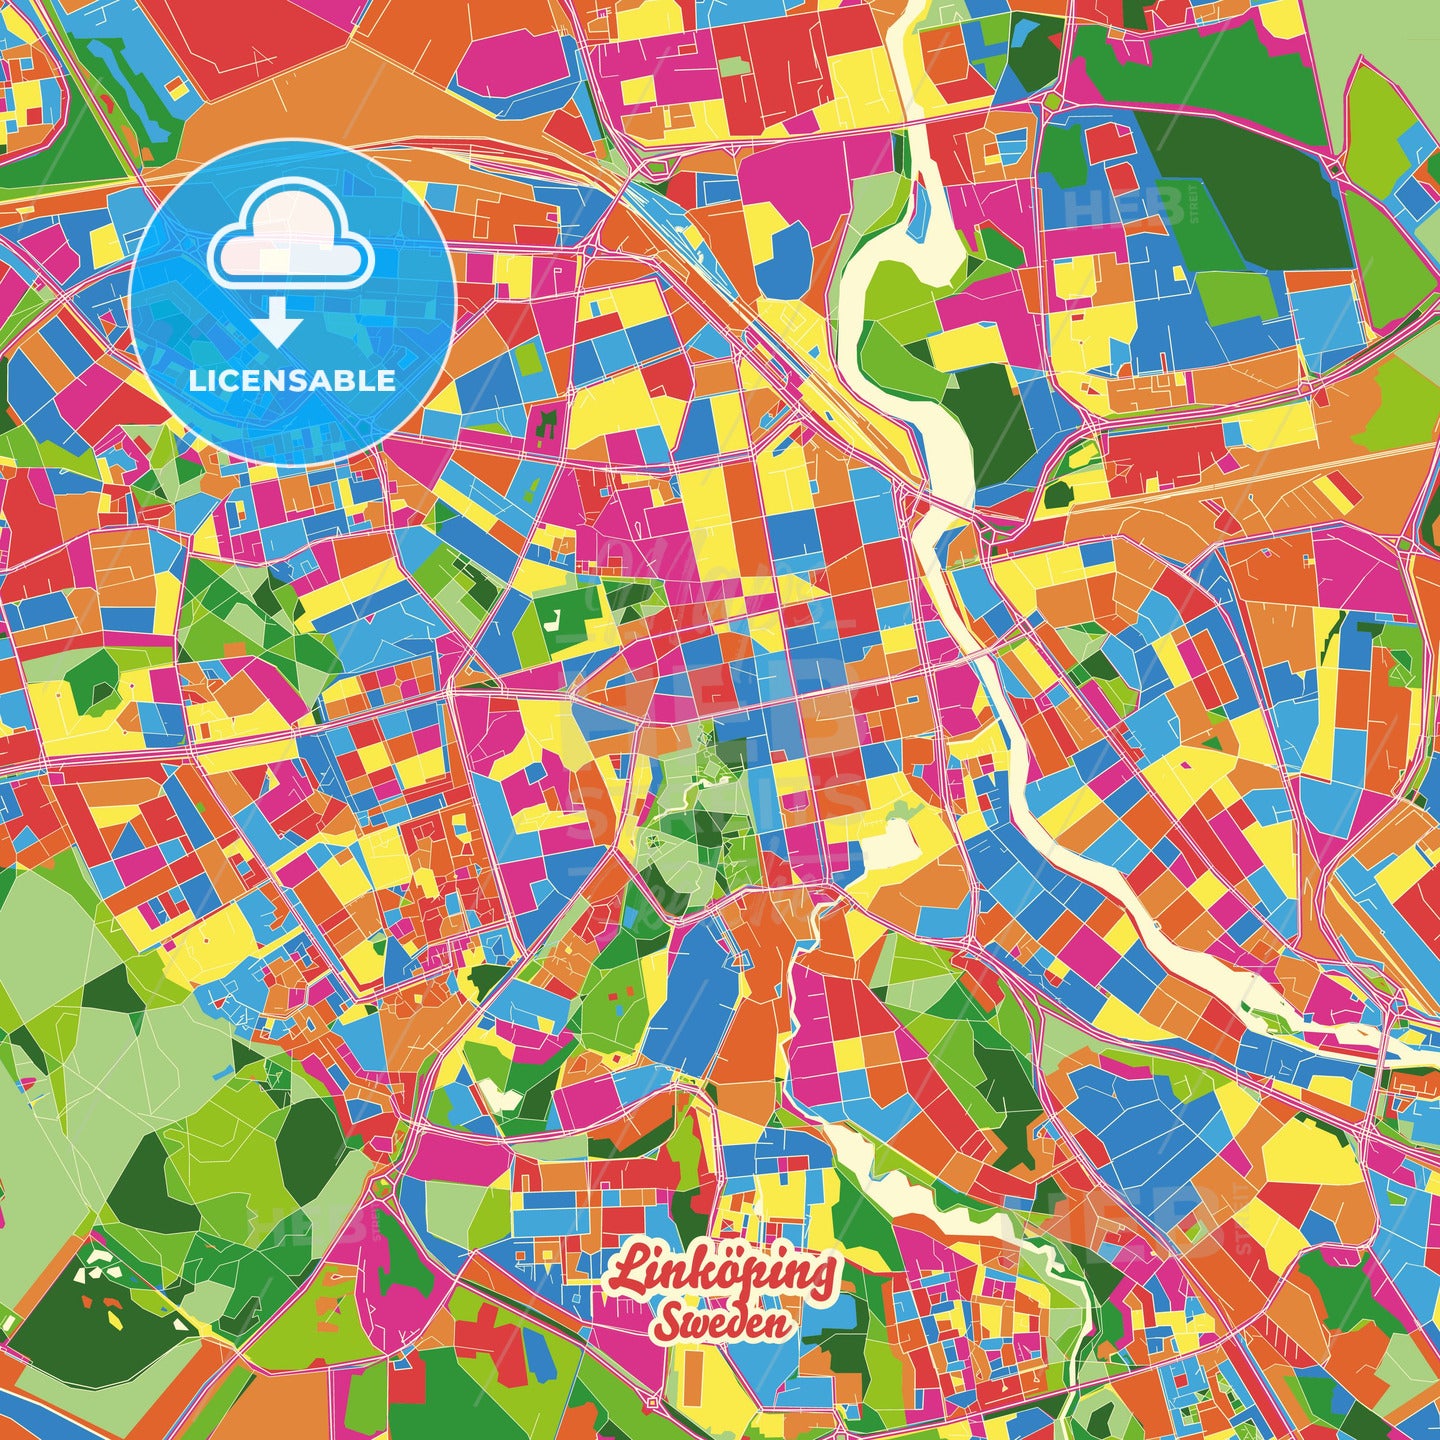 Linköping, Sweden Crazy Colorful Street Map Poster Template - HEBSTREITS Sketches